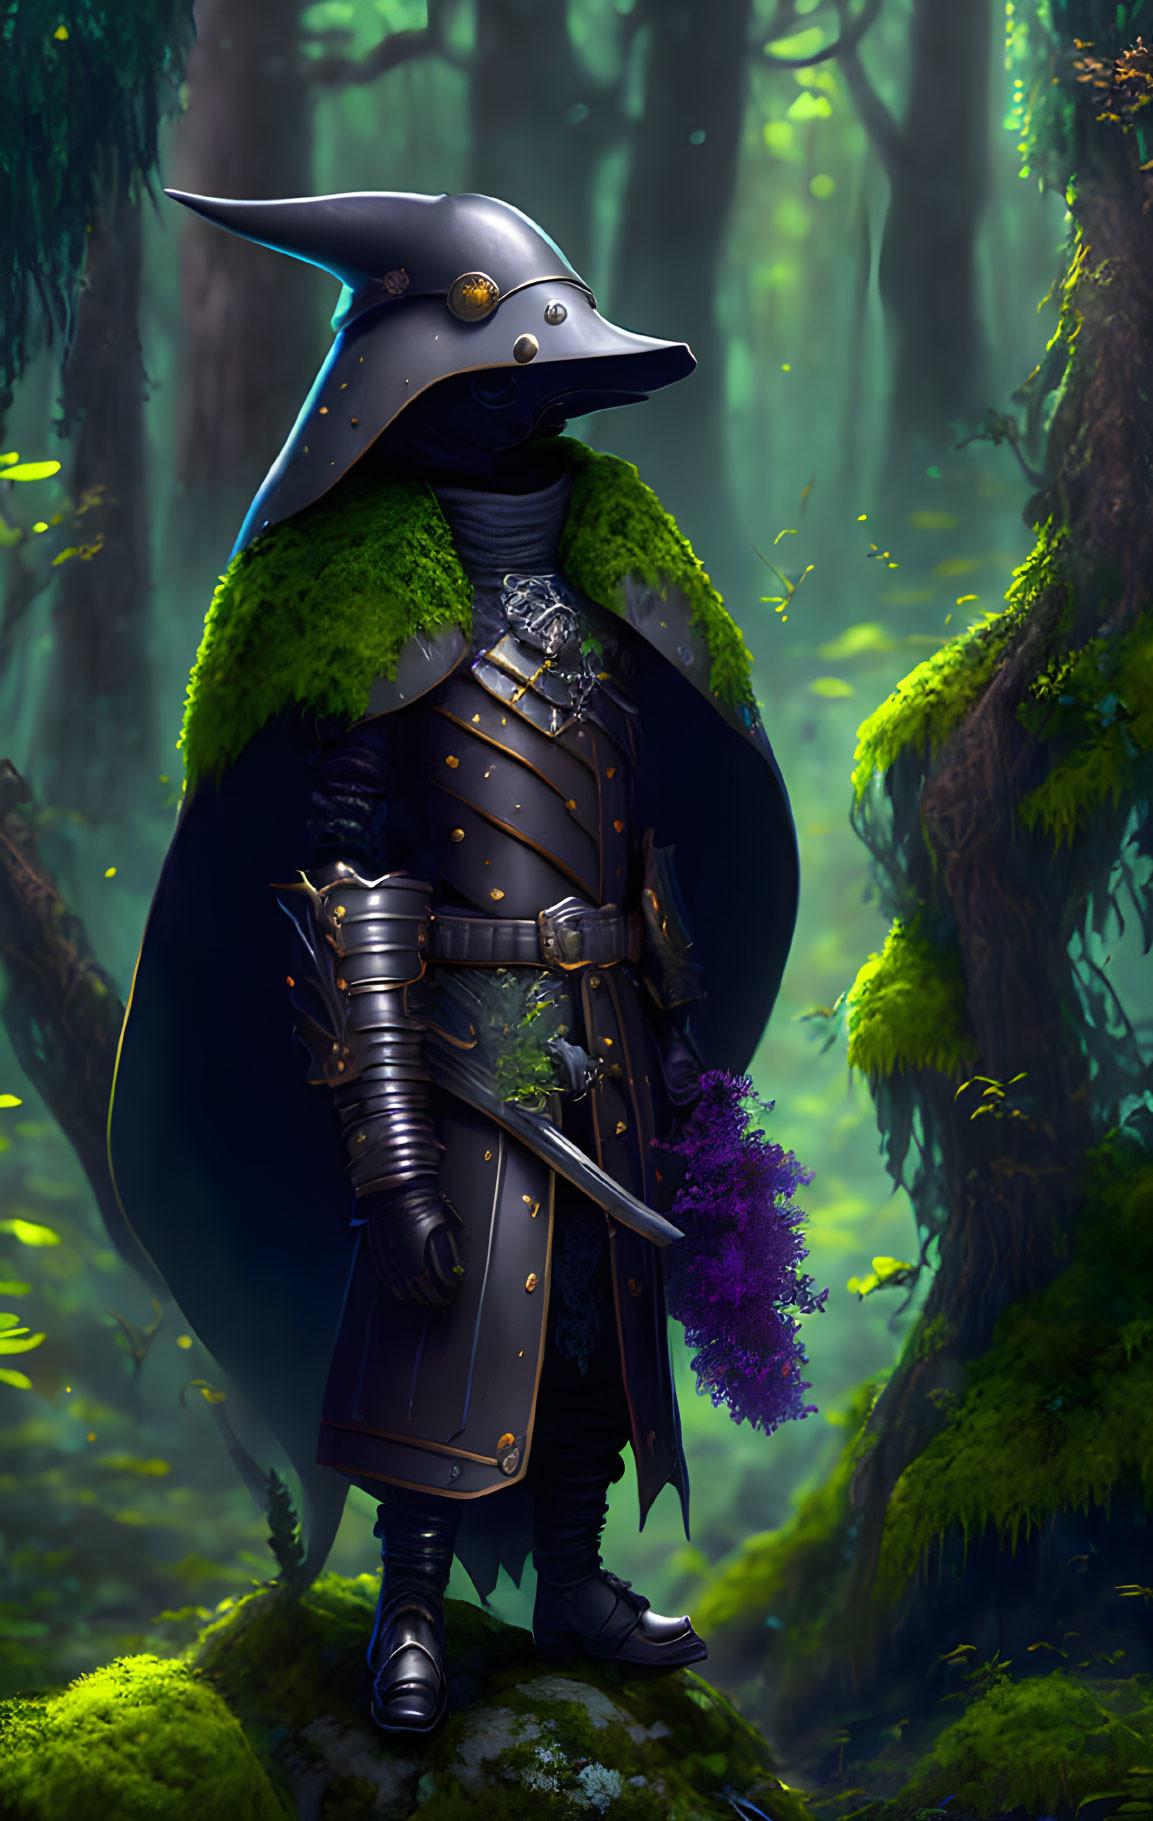 Mystical forest scene with plague doctor in traditional beaked mask